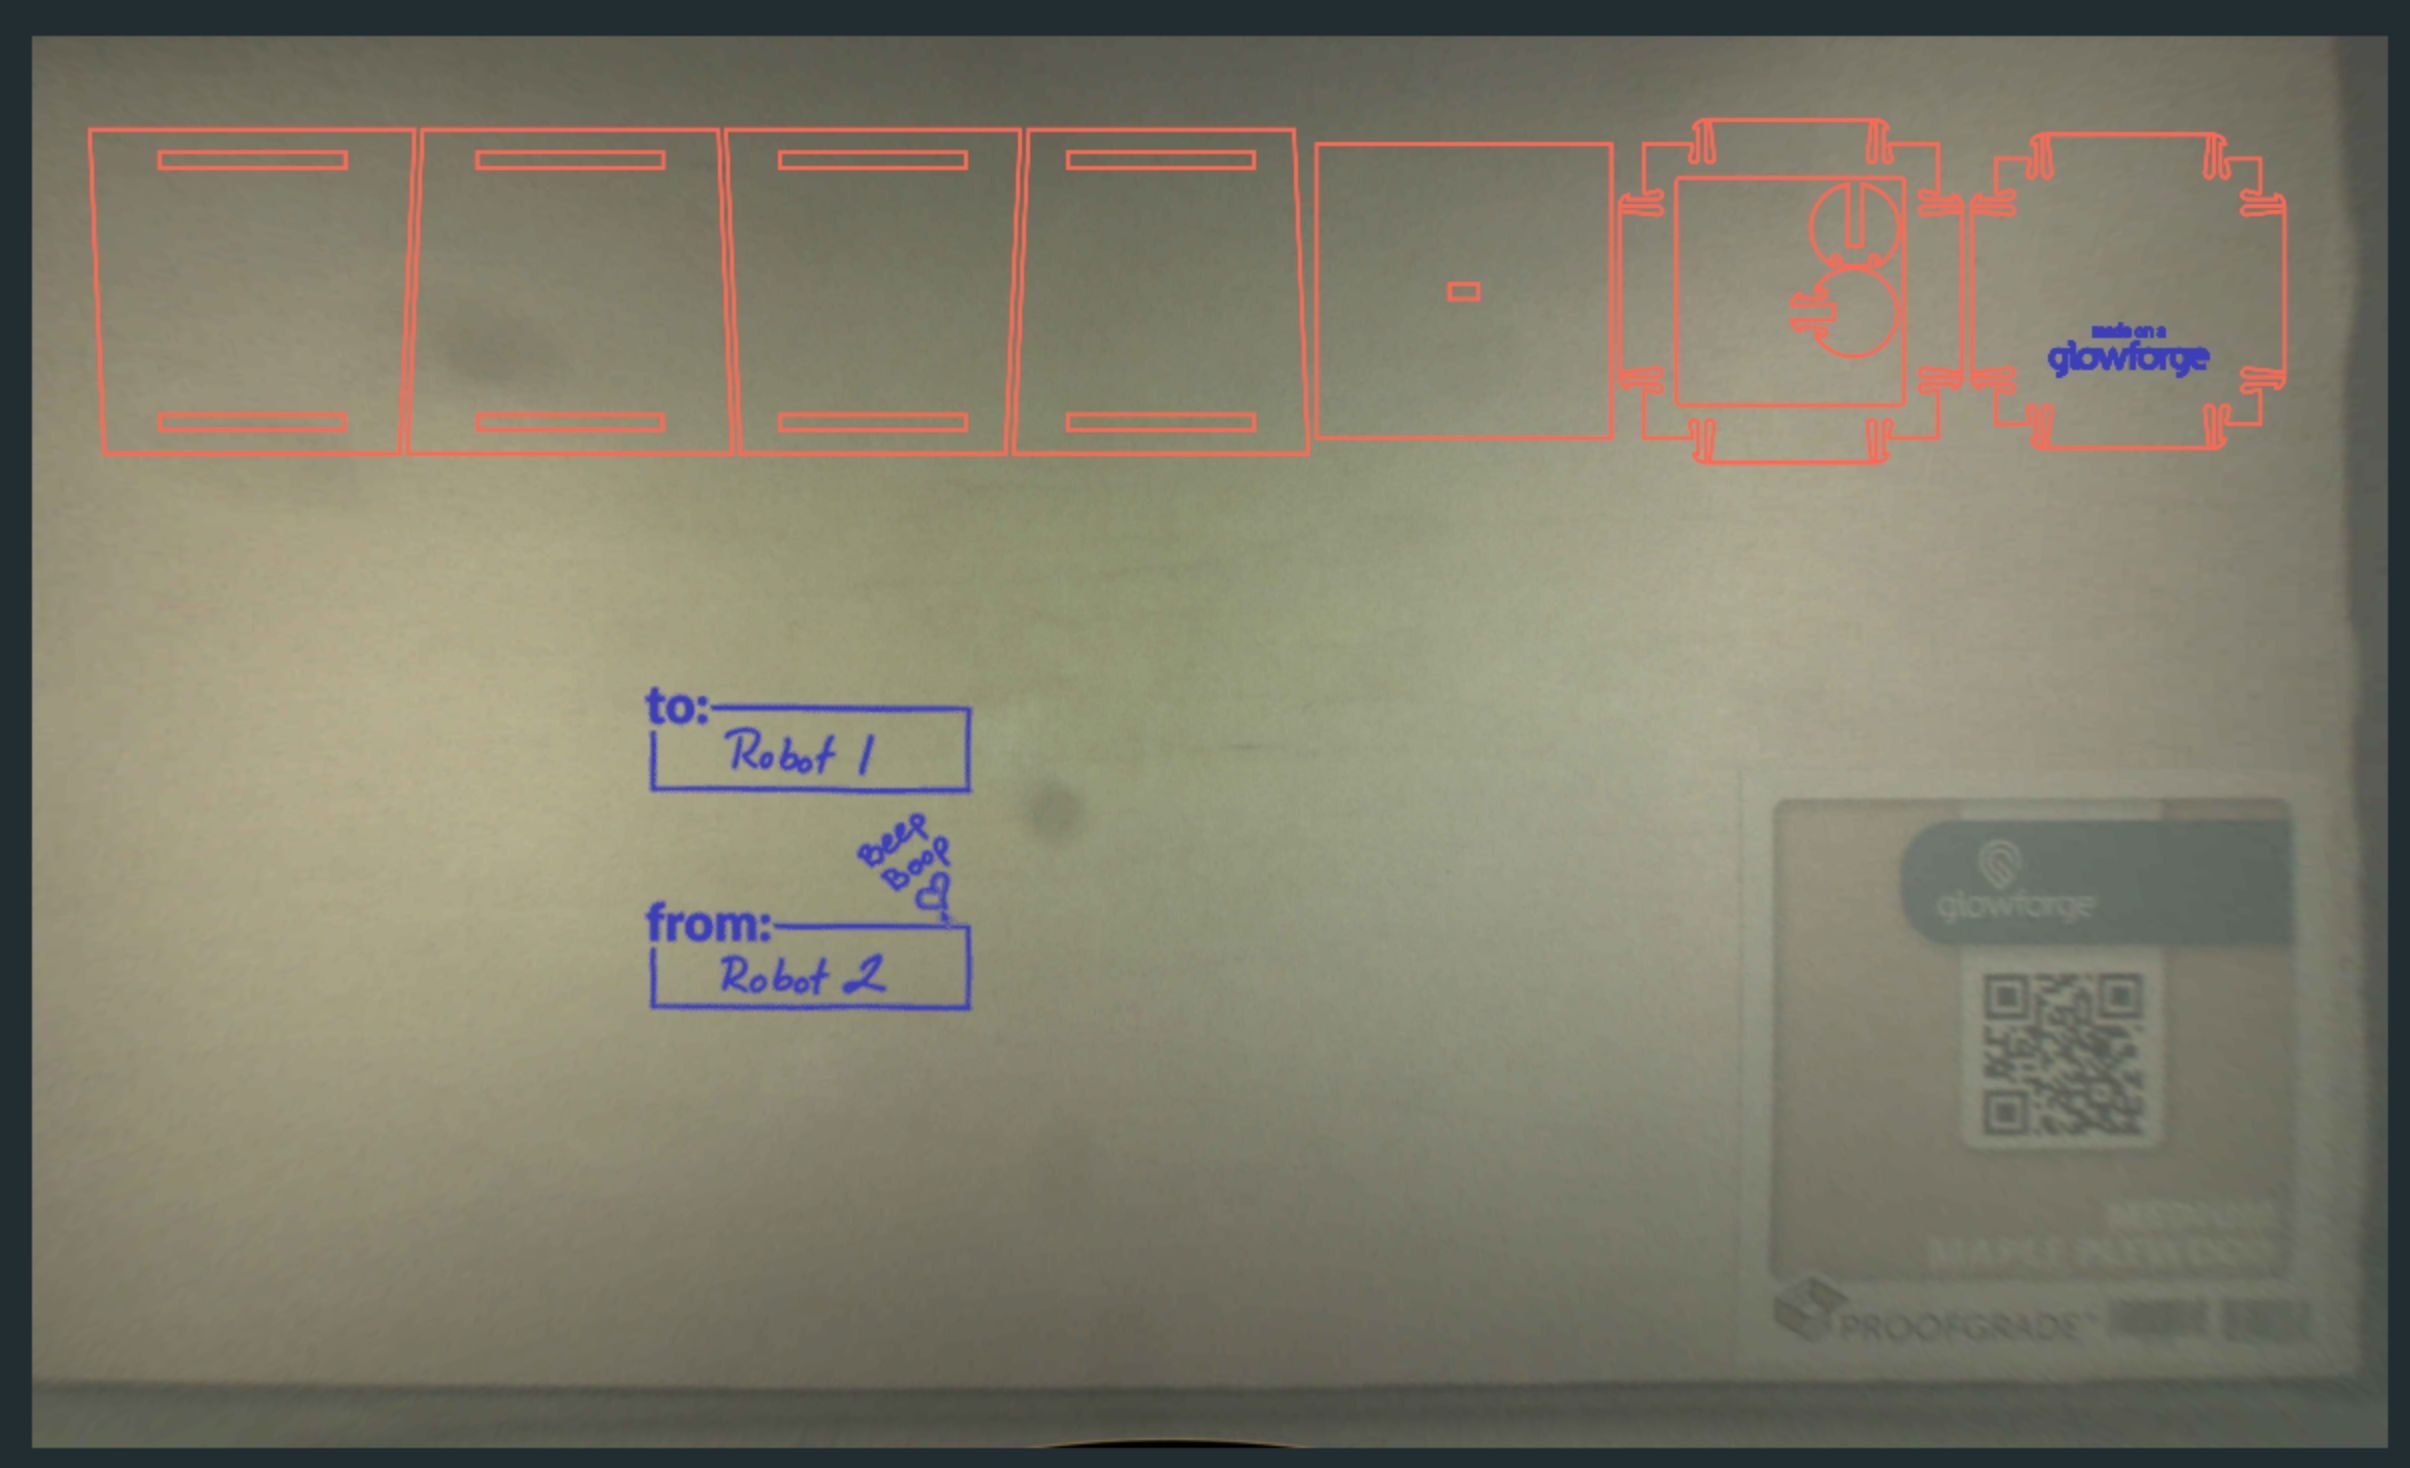 Screenshot showing the print area of the Glowforge, with material loaded and traced artwork in the workspace